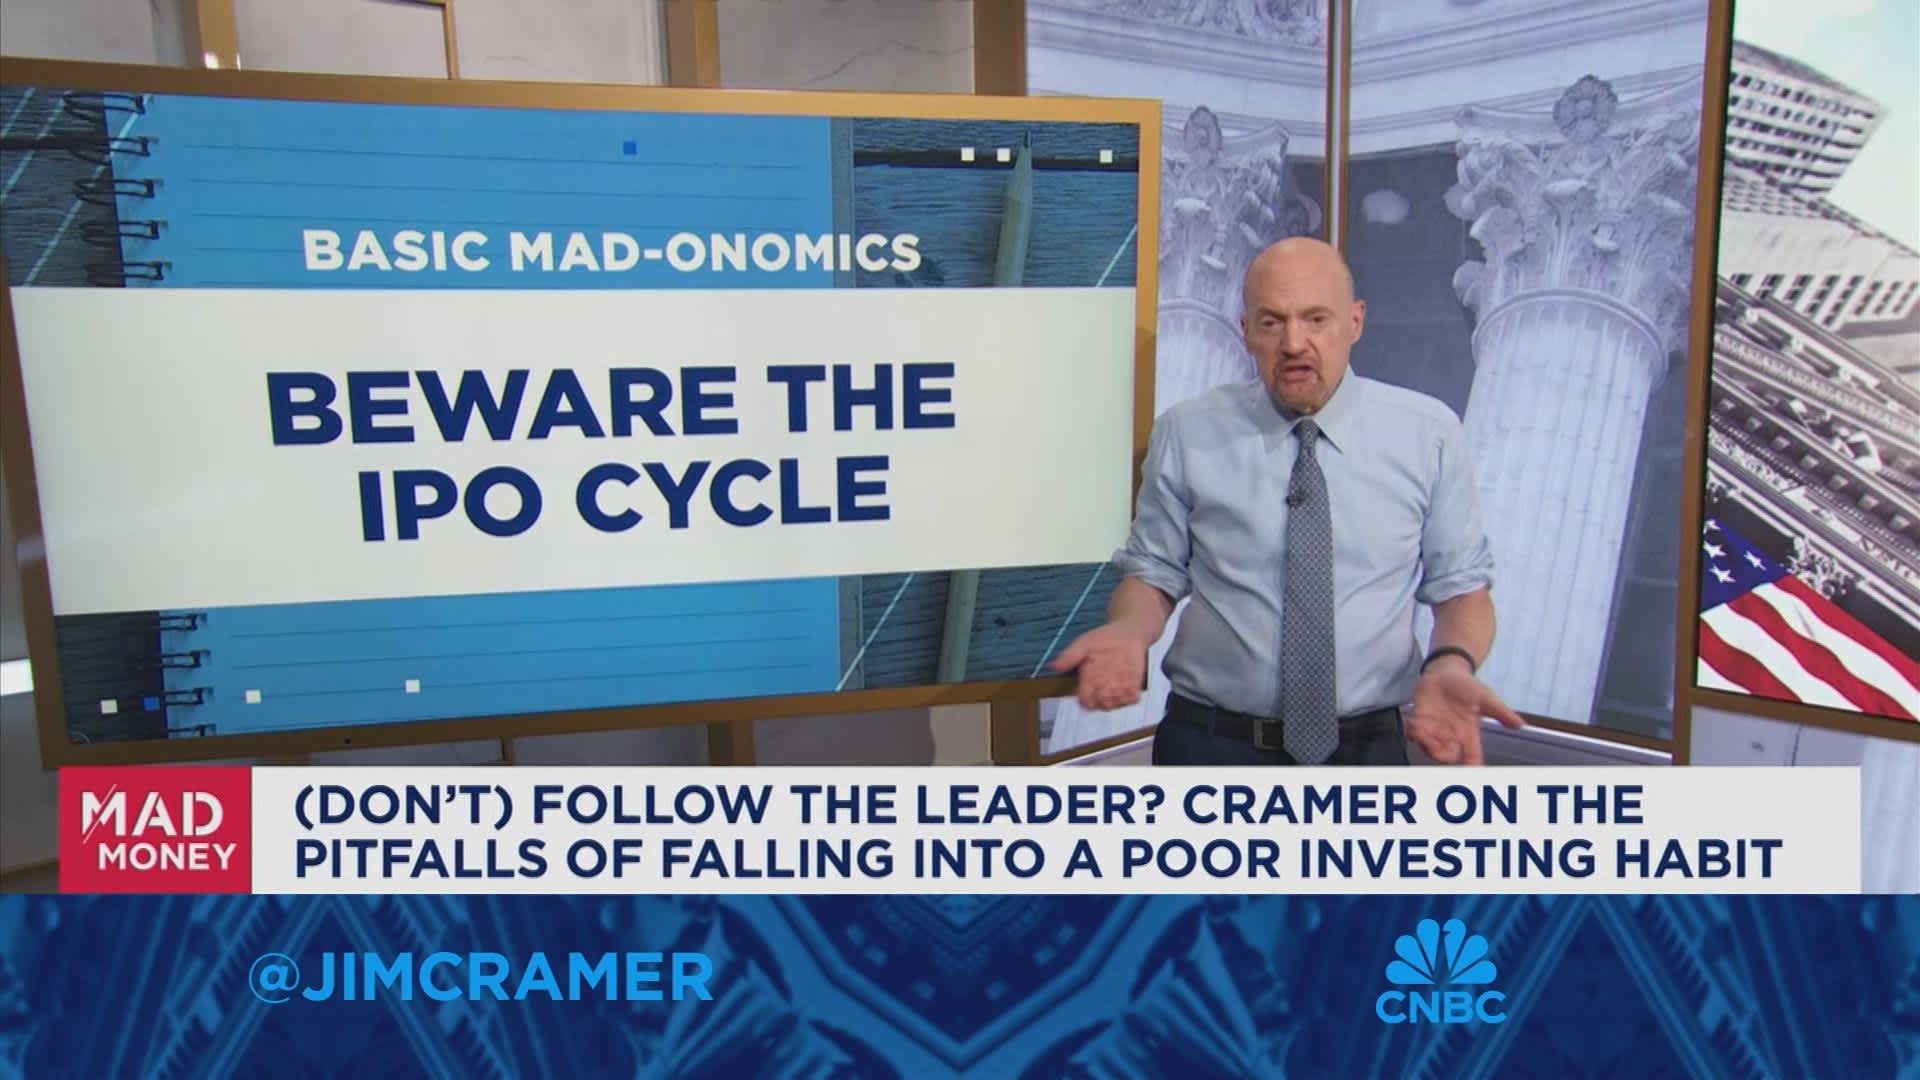 Follow the leader? Cramer on the pitfalls of falling into a poor investment habit [Video]